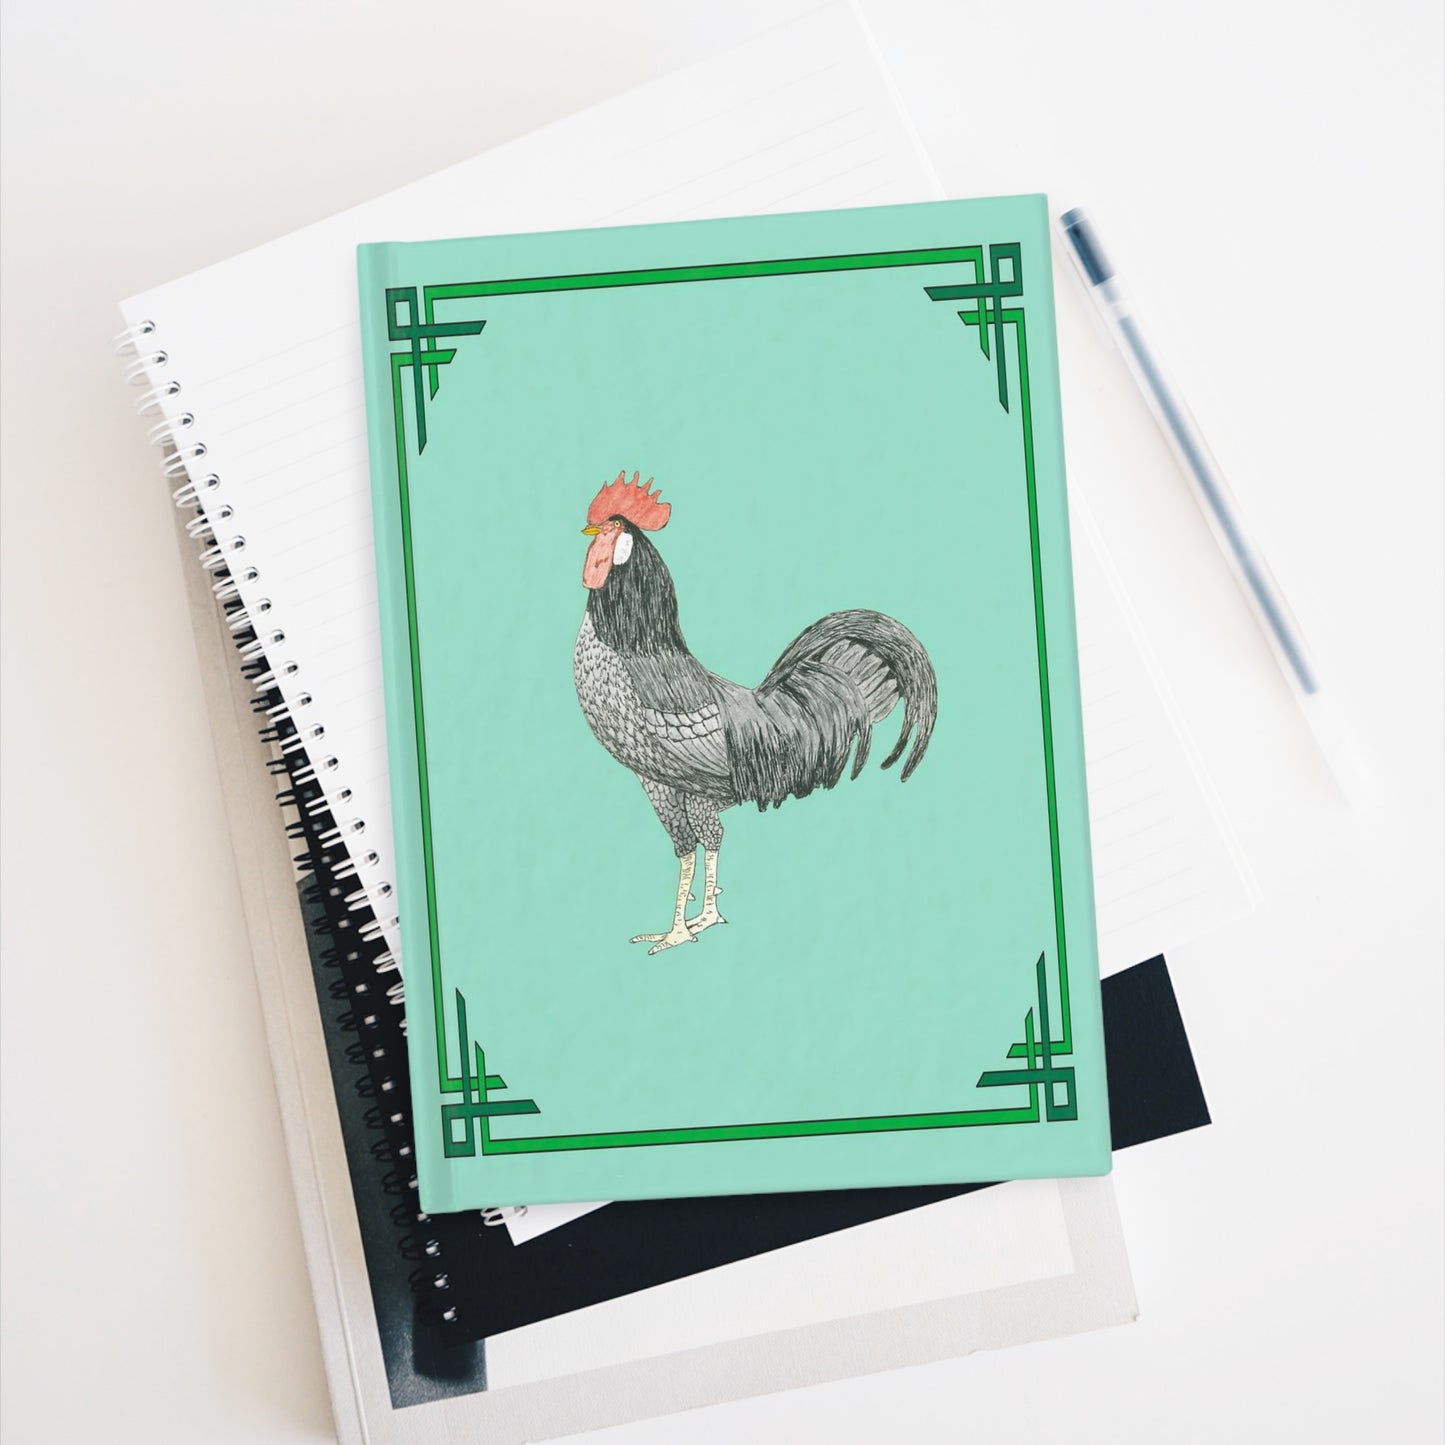 Adam Rooster Lined Page Journal